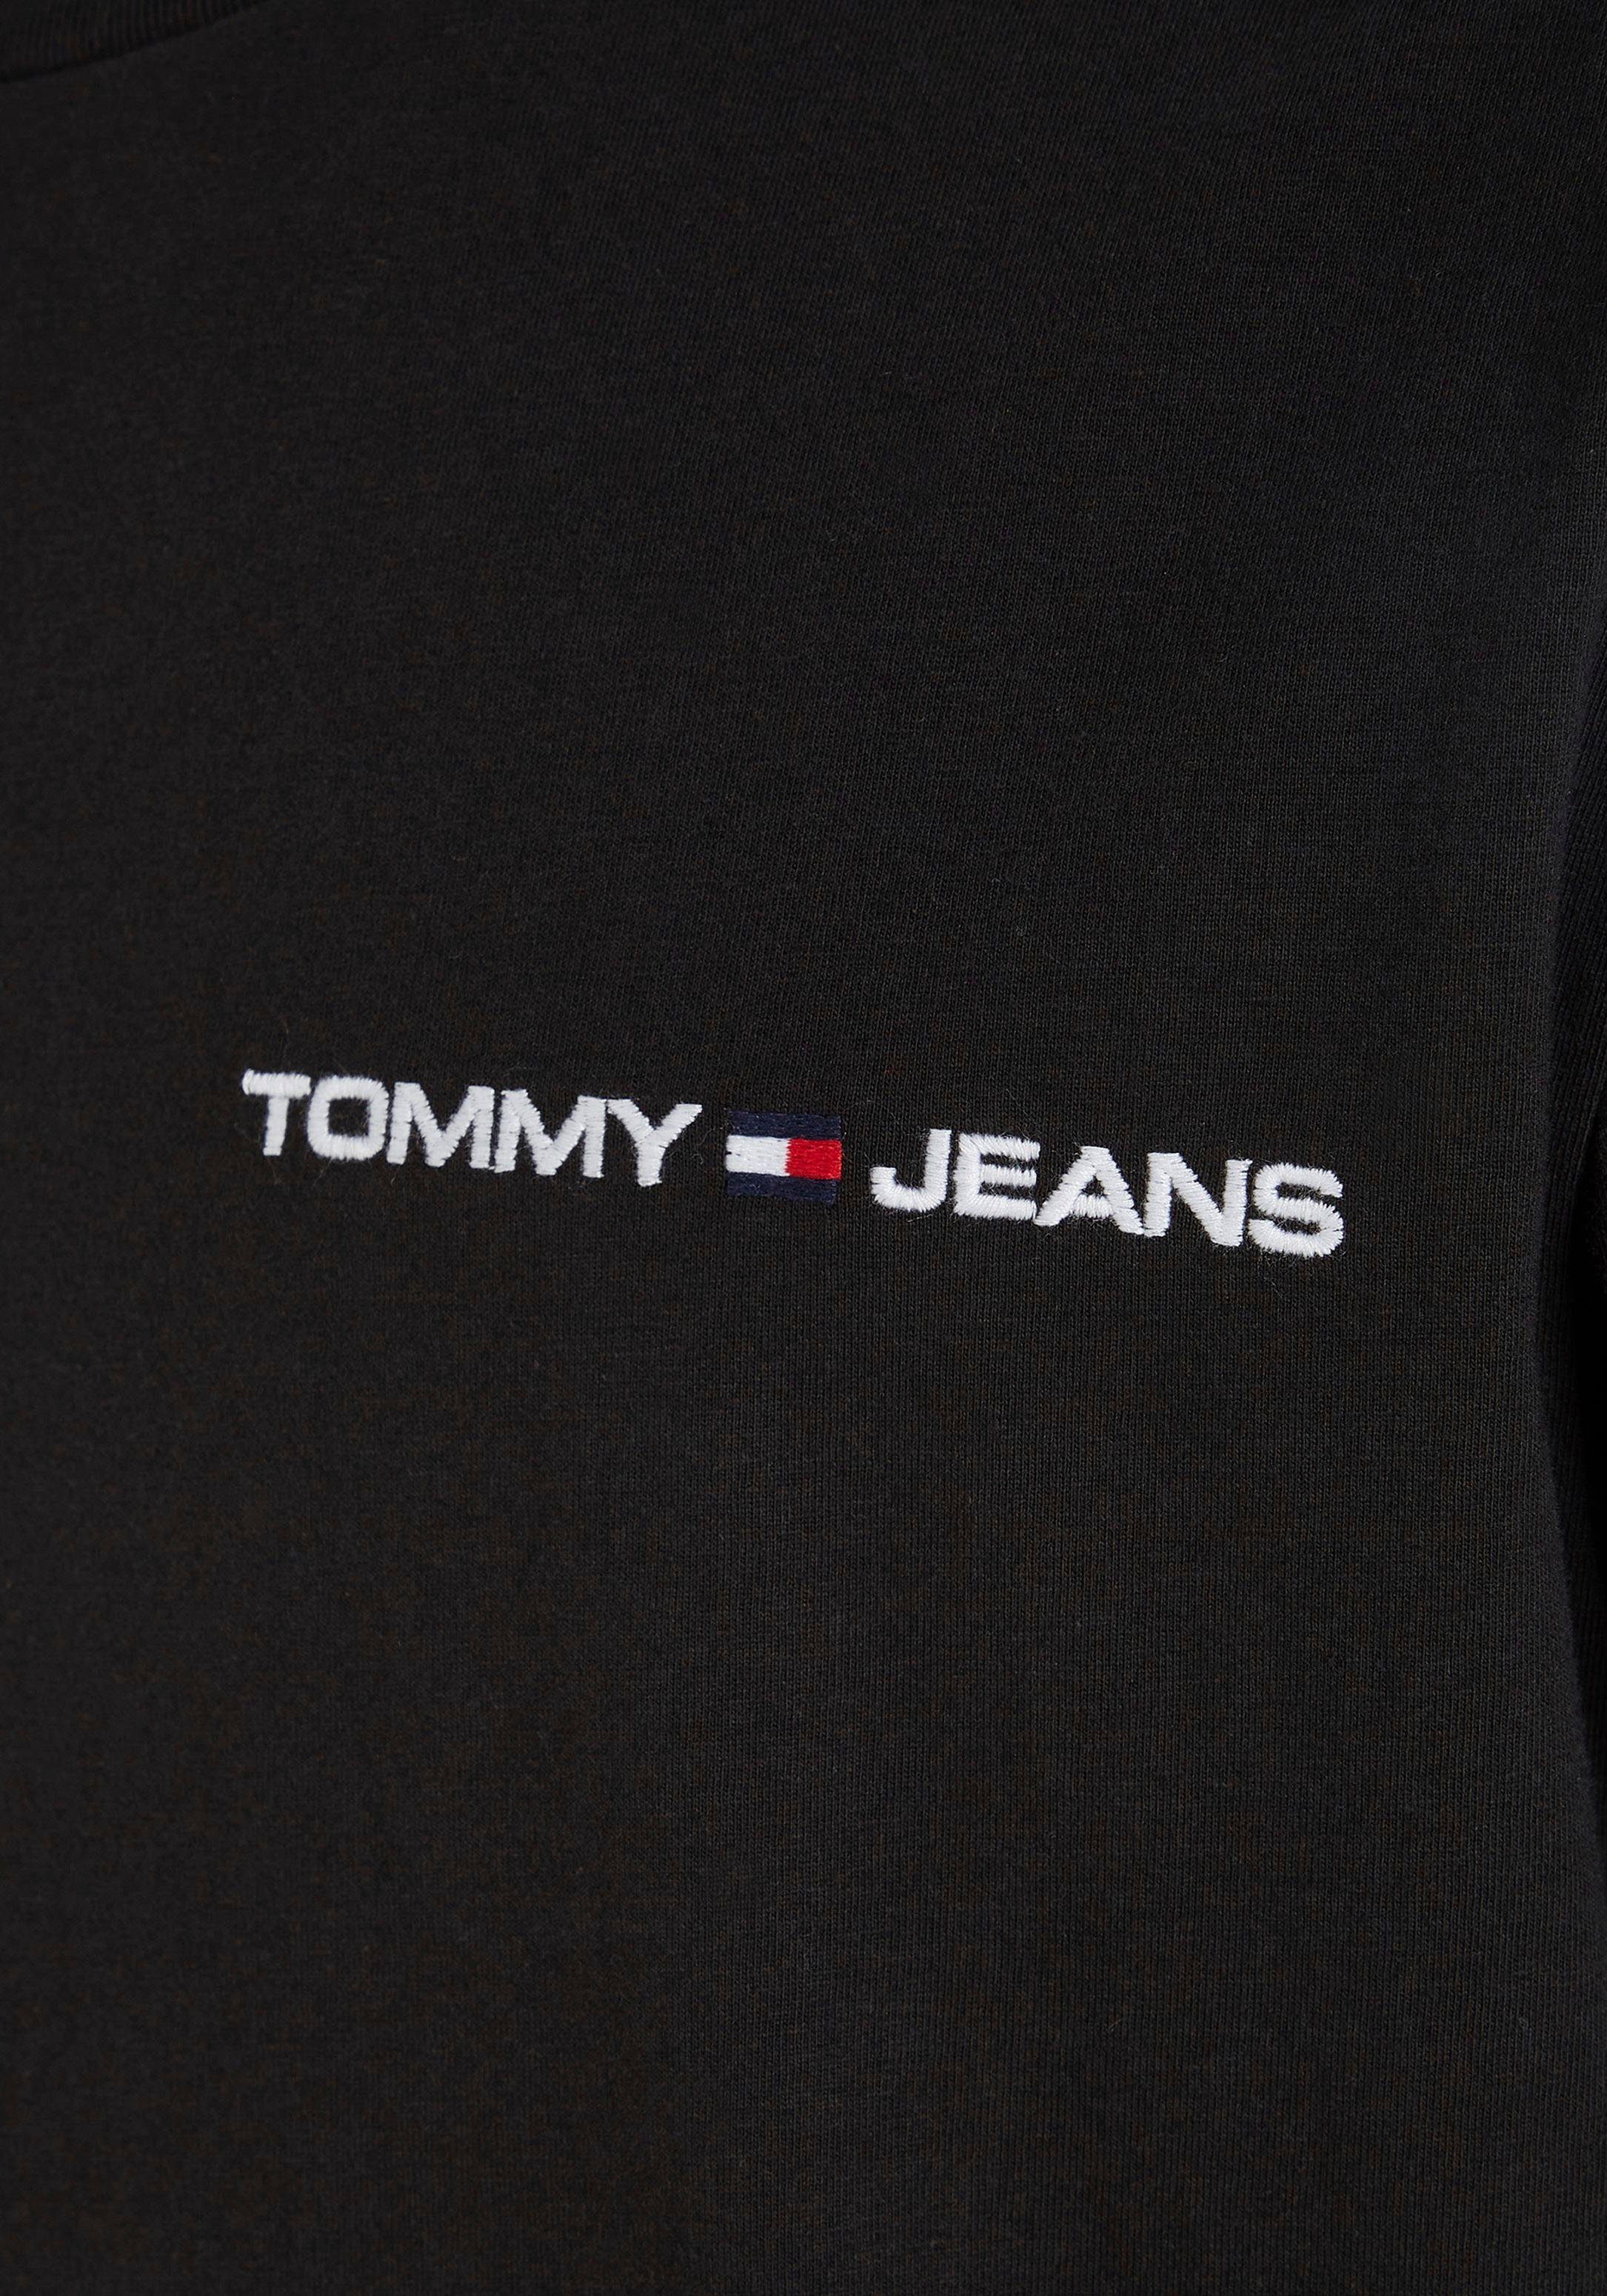 Tommy Jeans CLSC LINEAR Black CHEST TJM TEE T-Shirt